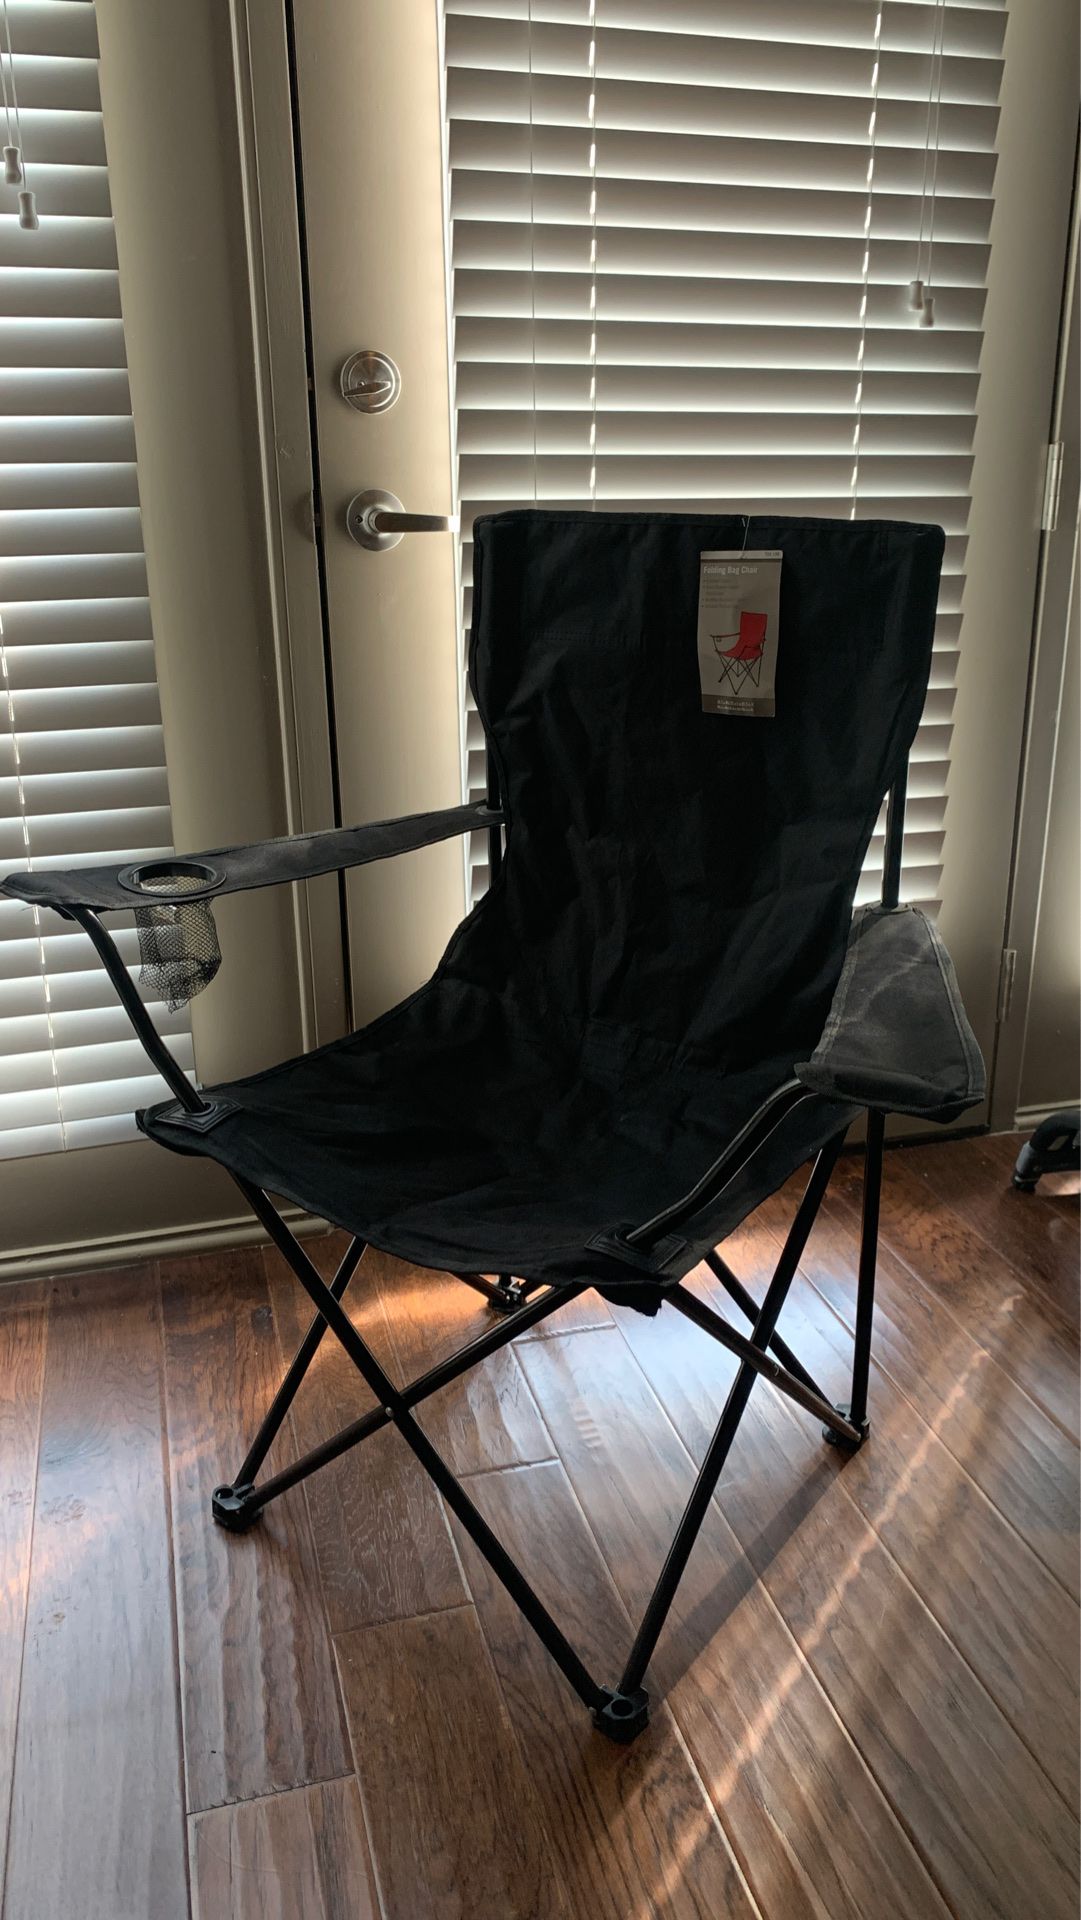 Folding chairs 2 for 10 dollars